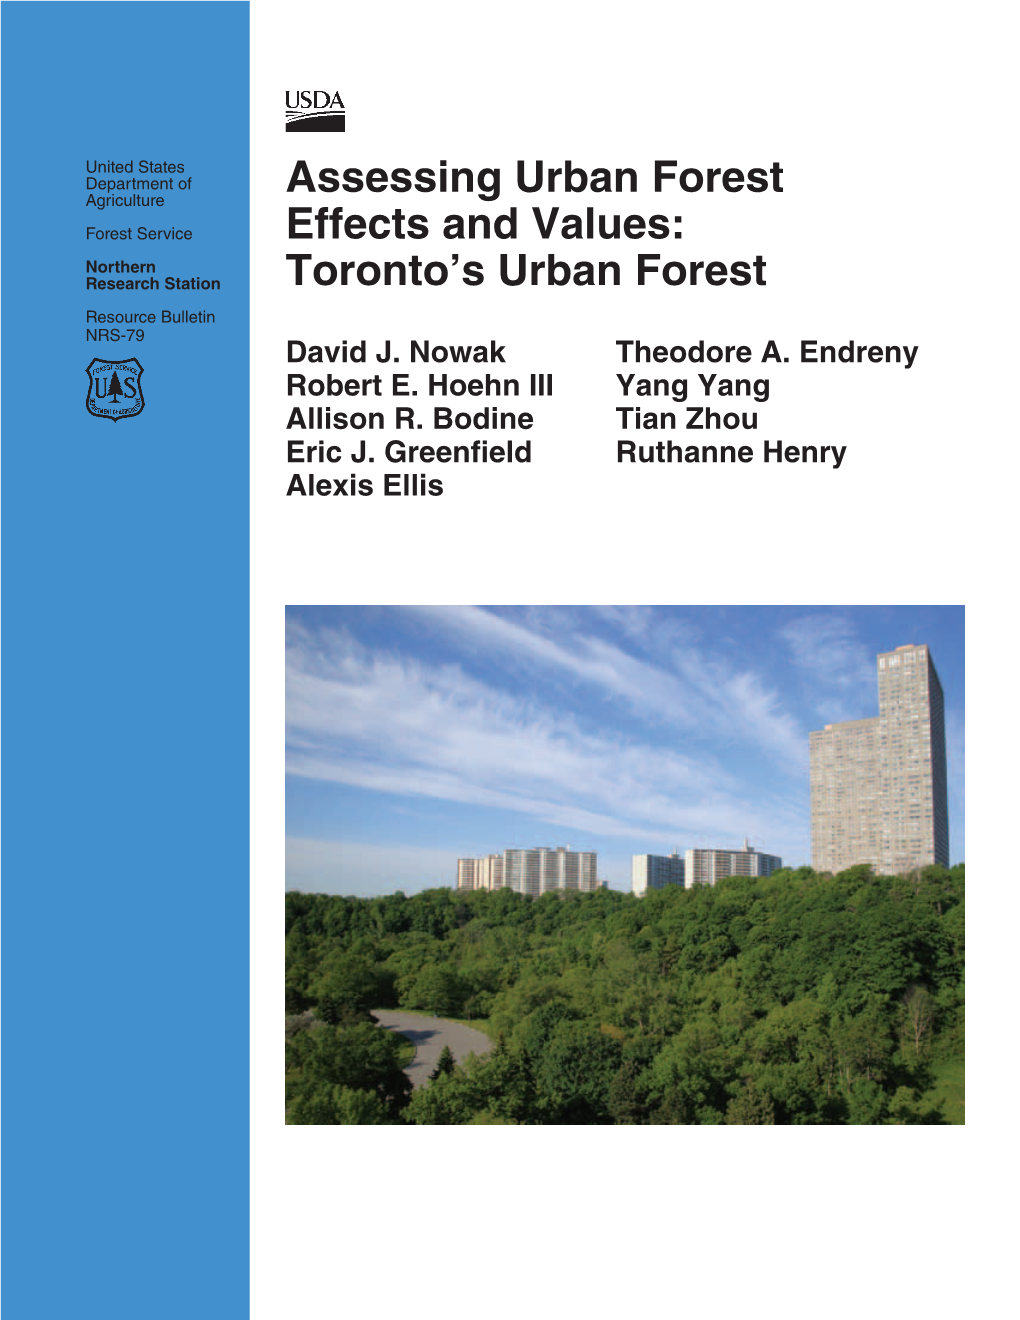 Assessing Urban Forest Effects and Values: Toronto's Urban Forest